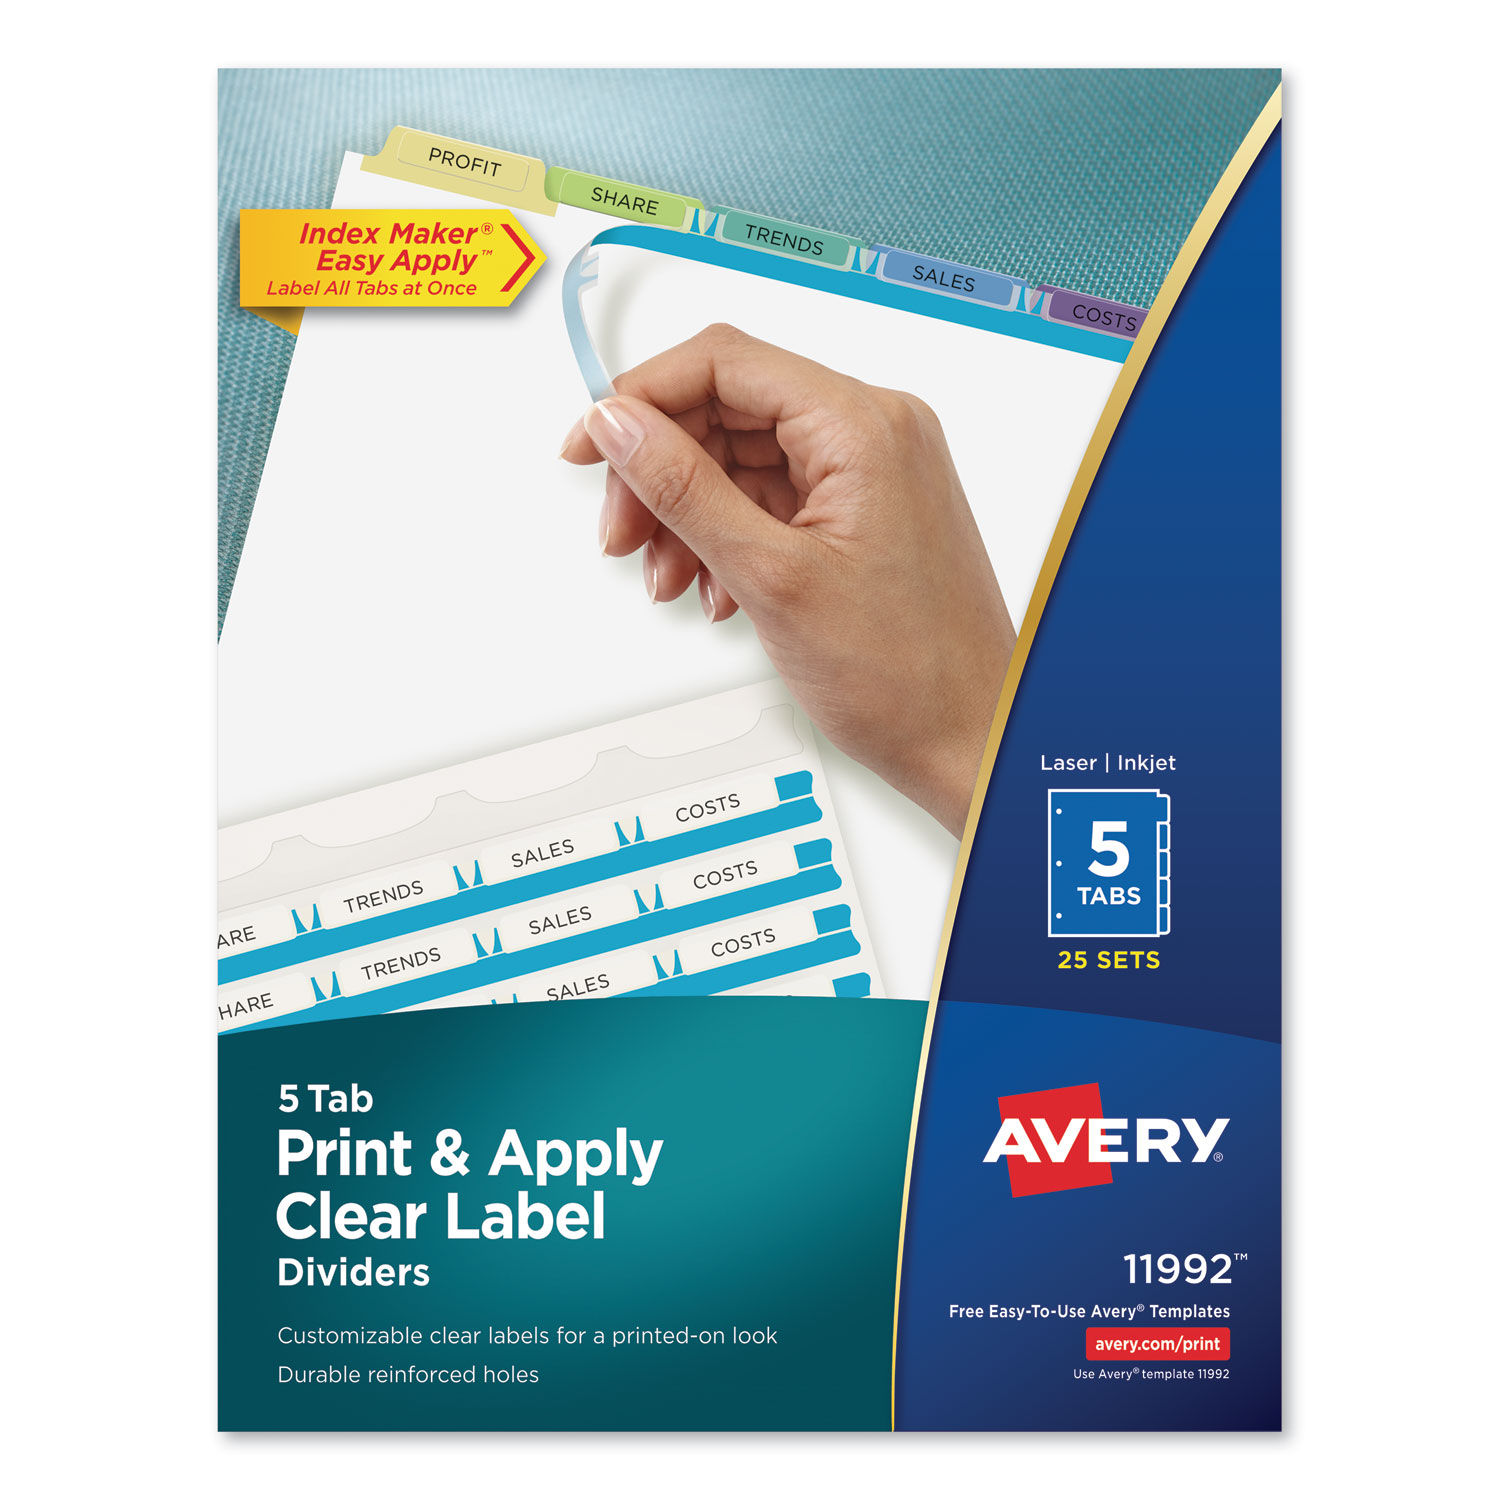  Avery 11992 Print and Apply Index Maker Clear Label Dividers, 5 Color Tabs, Letter, 25 Sets (AVE11992) 